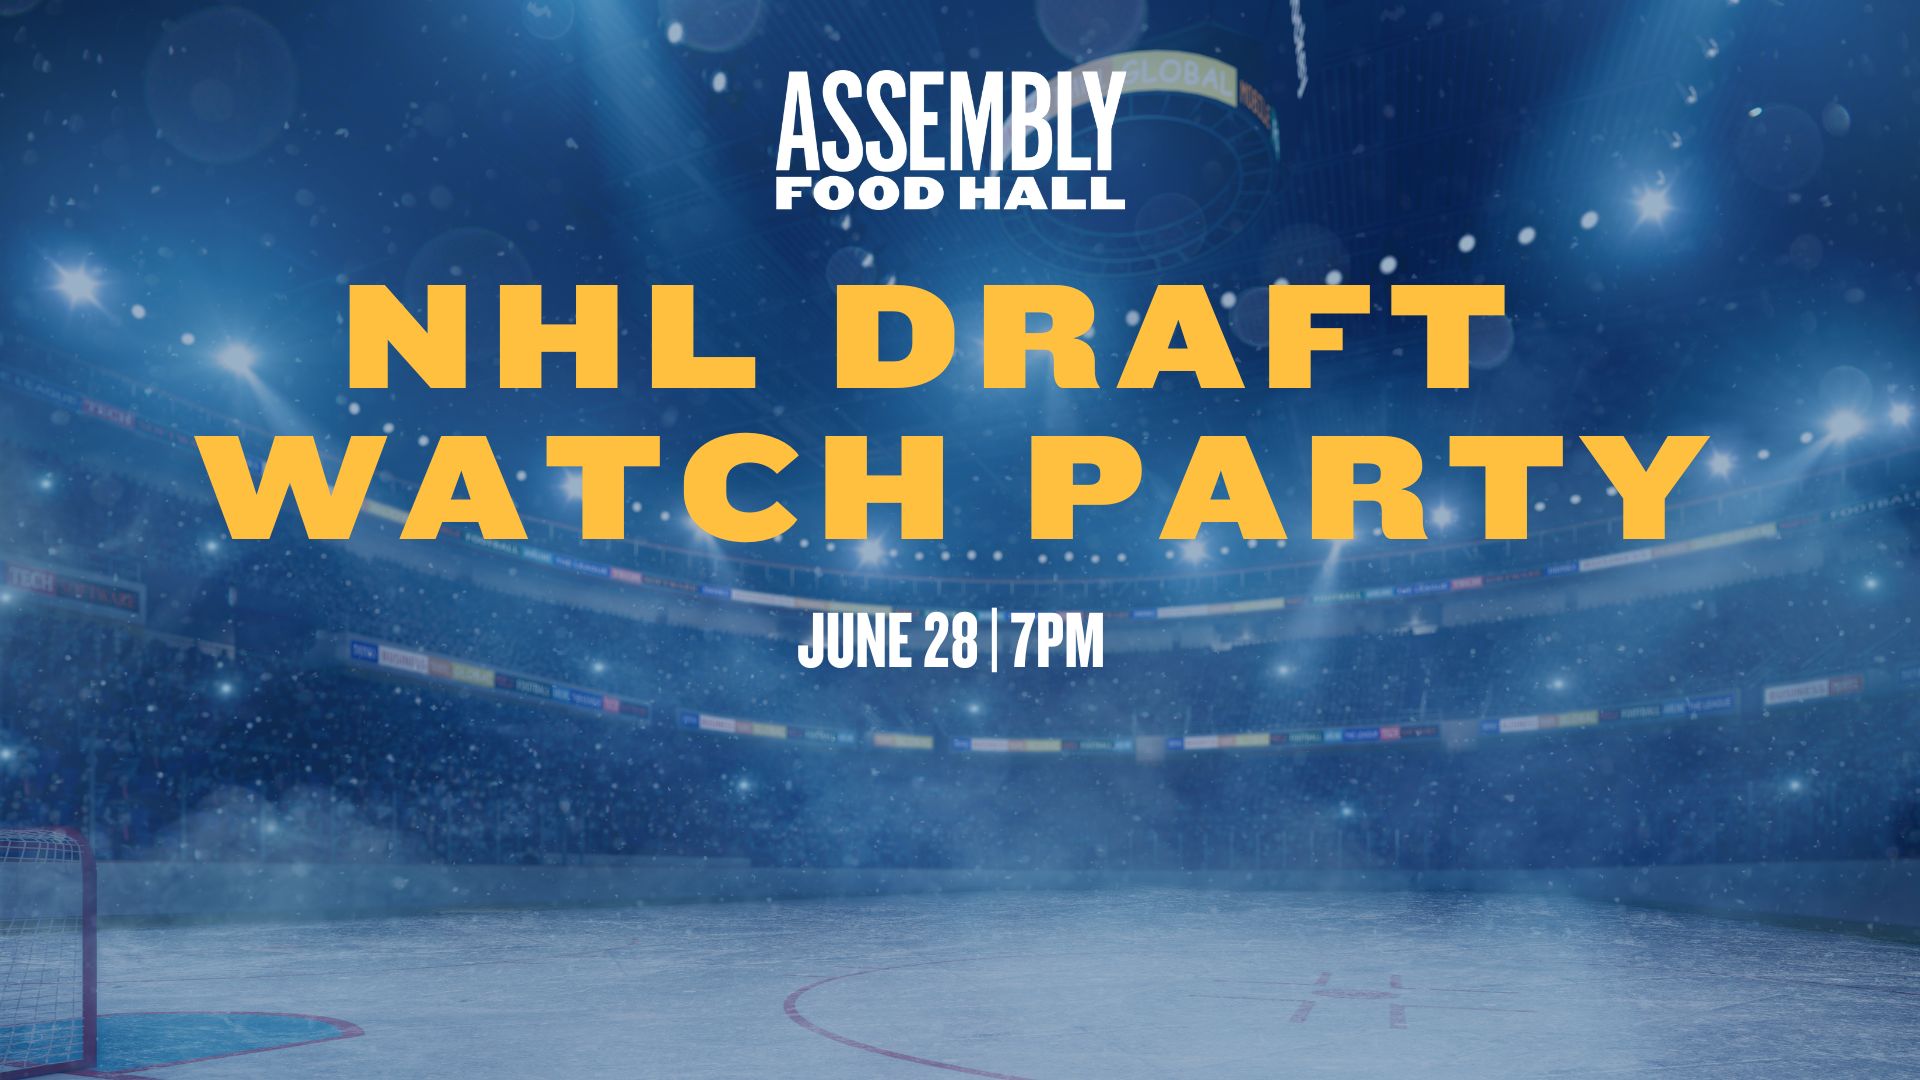 NHL DRAFT WATCH PARTY Assembly Food Hall